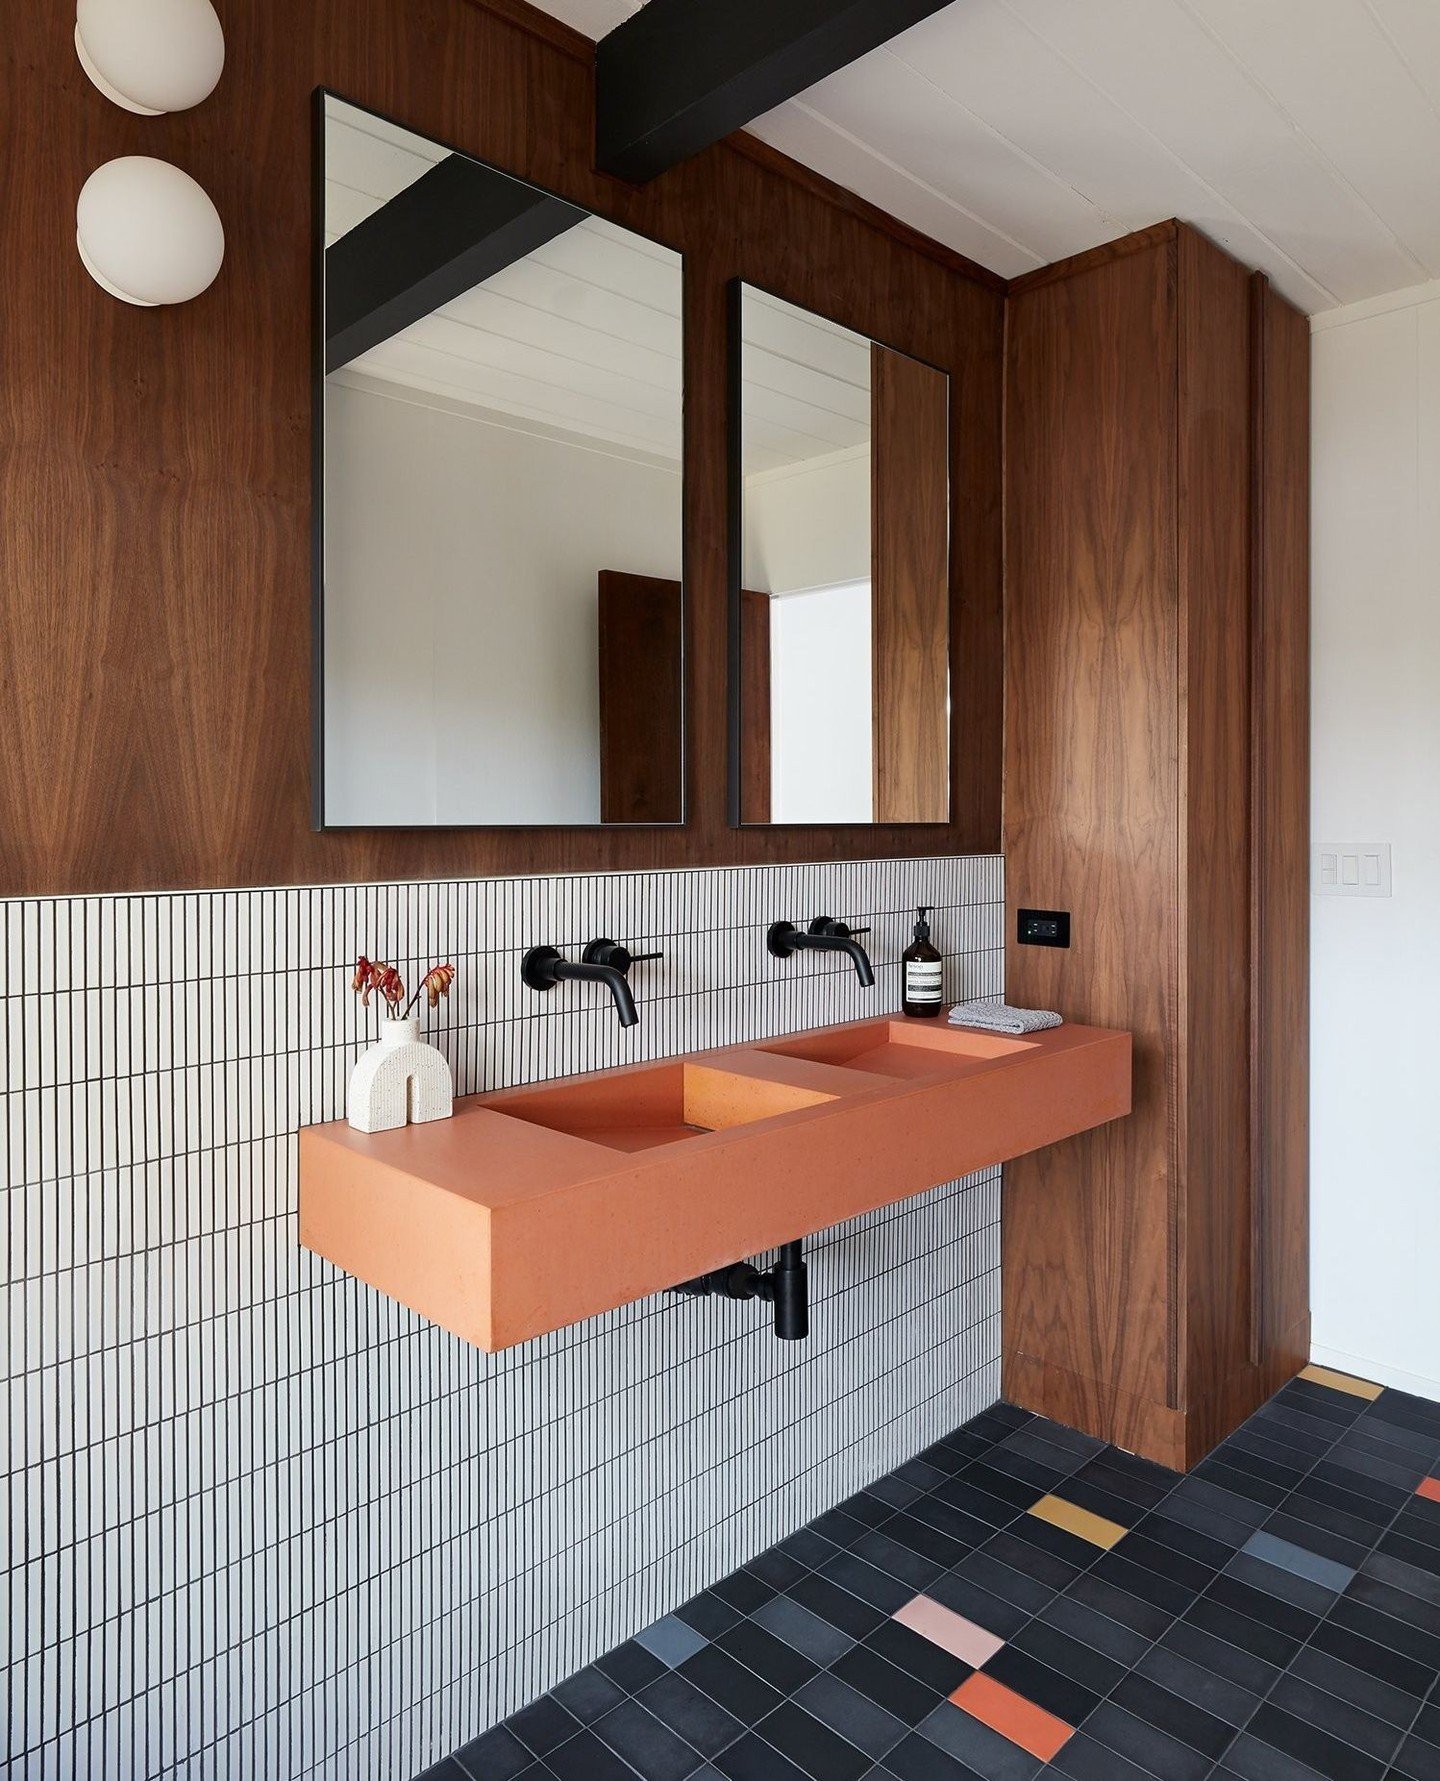 Incorporating a pop of colour with warm wood tones and playful tiles, this mid-century modern bathroom design by @marshall.interiors feels like an escape from the outside world.💫⁠
⁠
The Flor Double basin is dedicated to functionality, crafted to mak